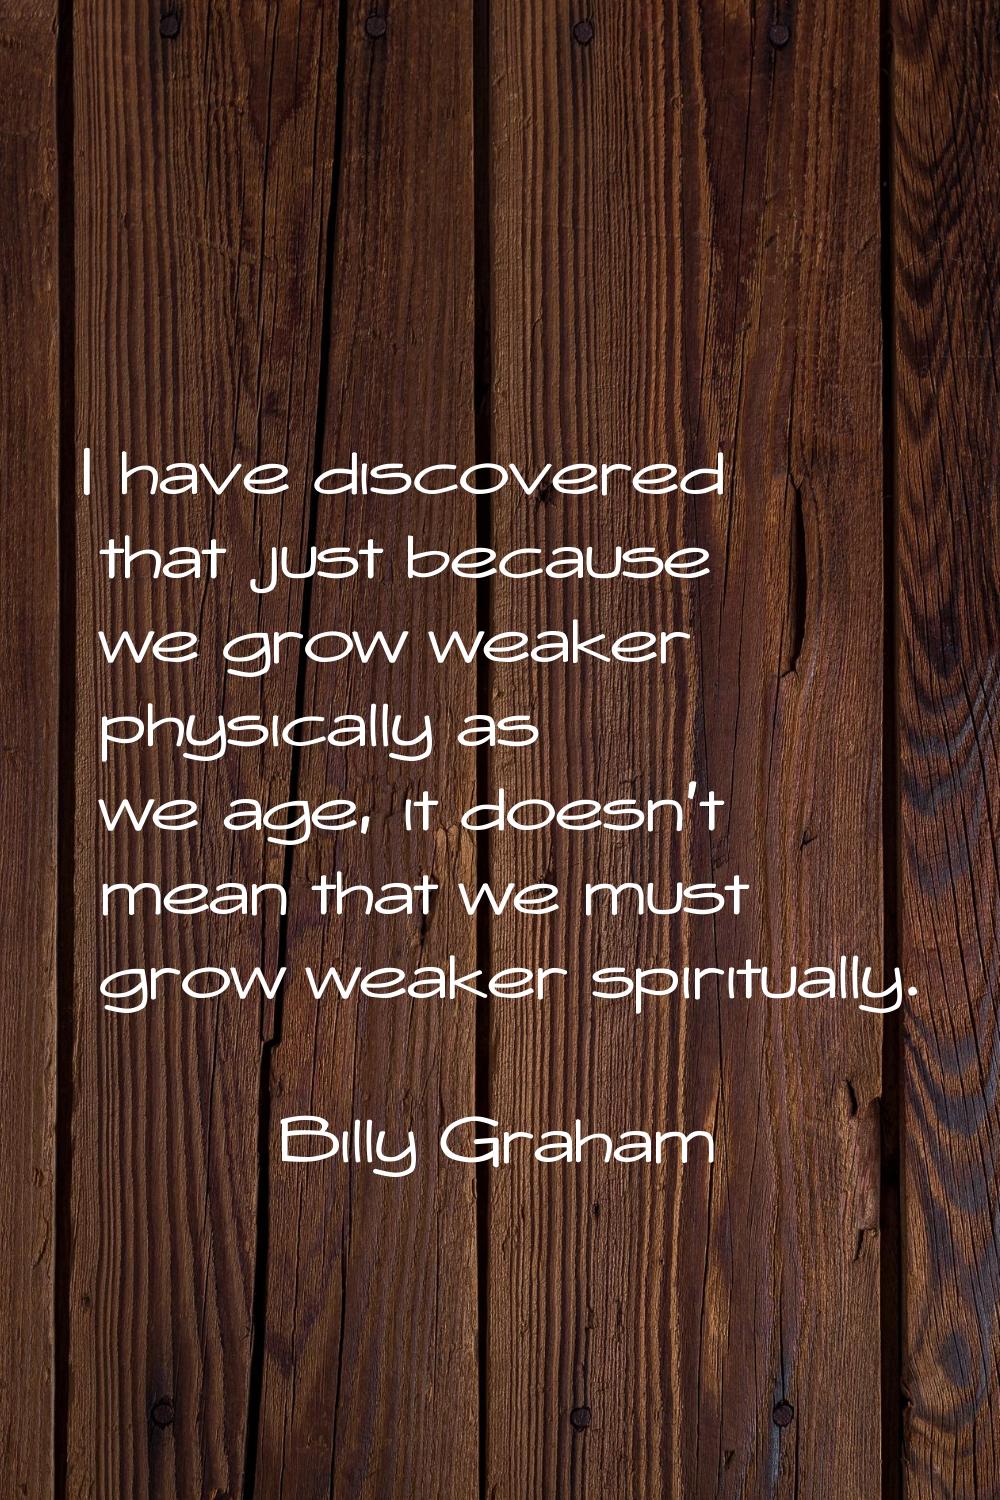 I have discovered that just because we grow weaker physically as we age, it doesn't mean that we mu